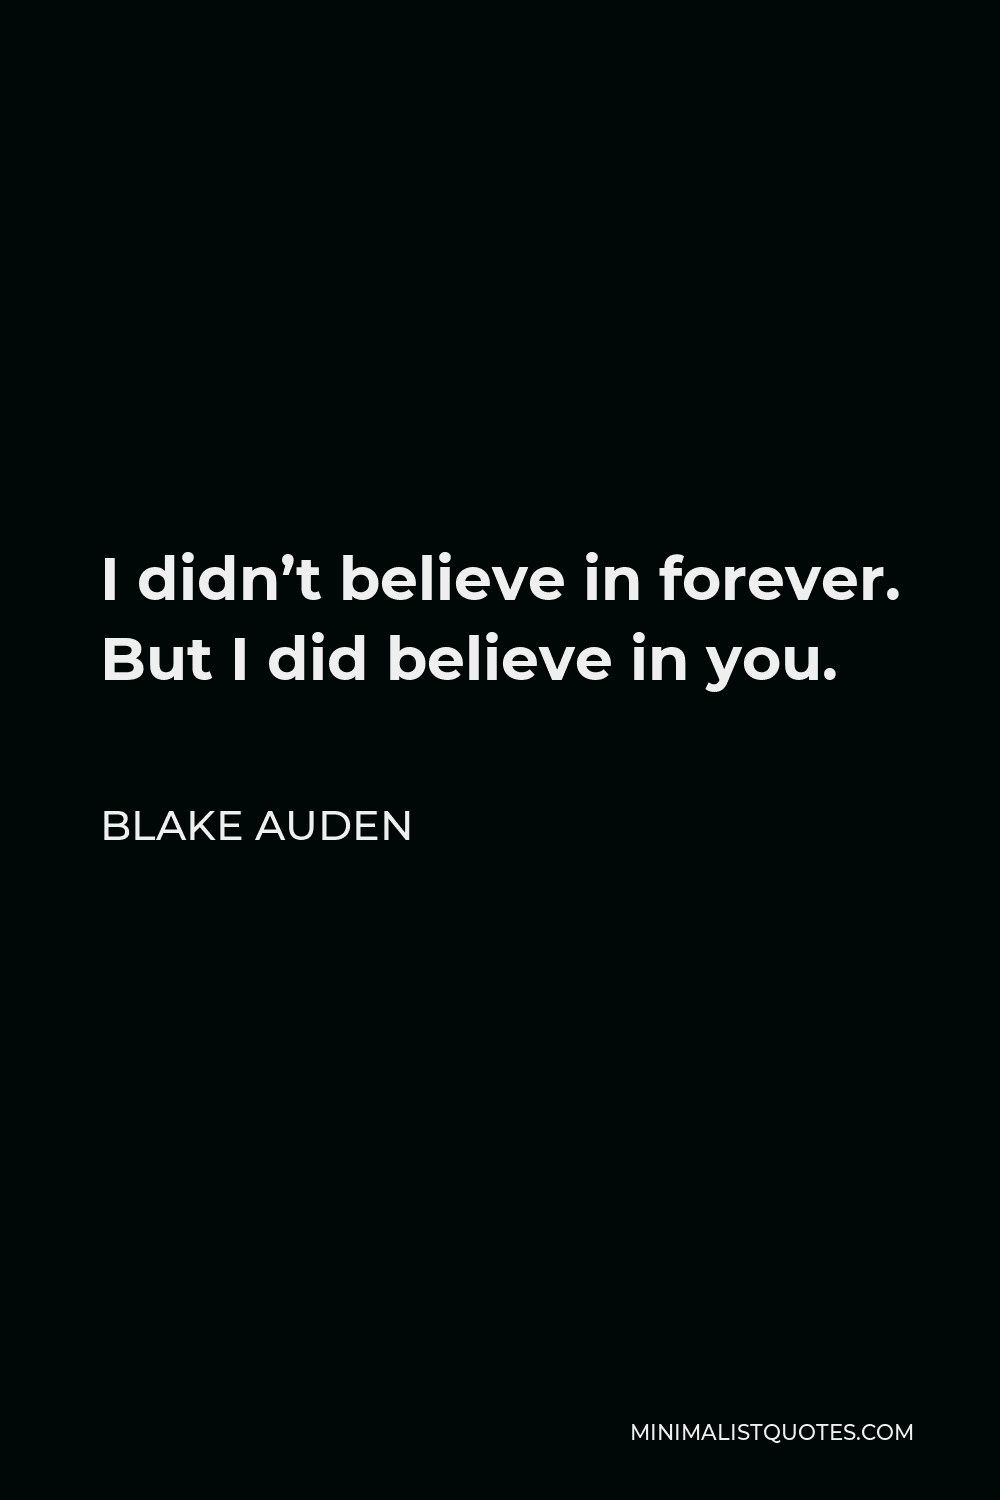 Blake Auden Quote - I didn’t believe in forever. But I did believe in you.